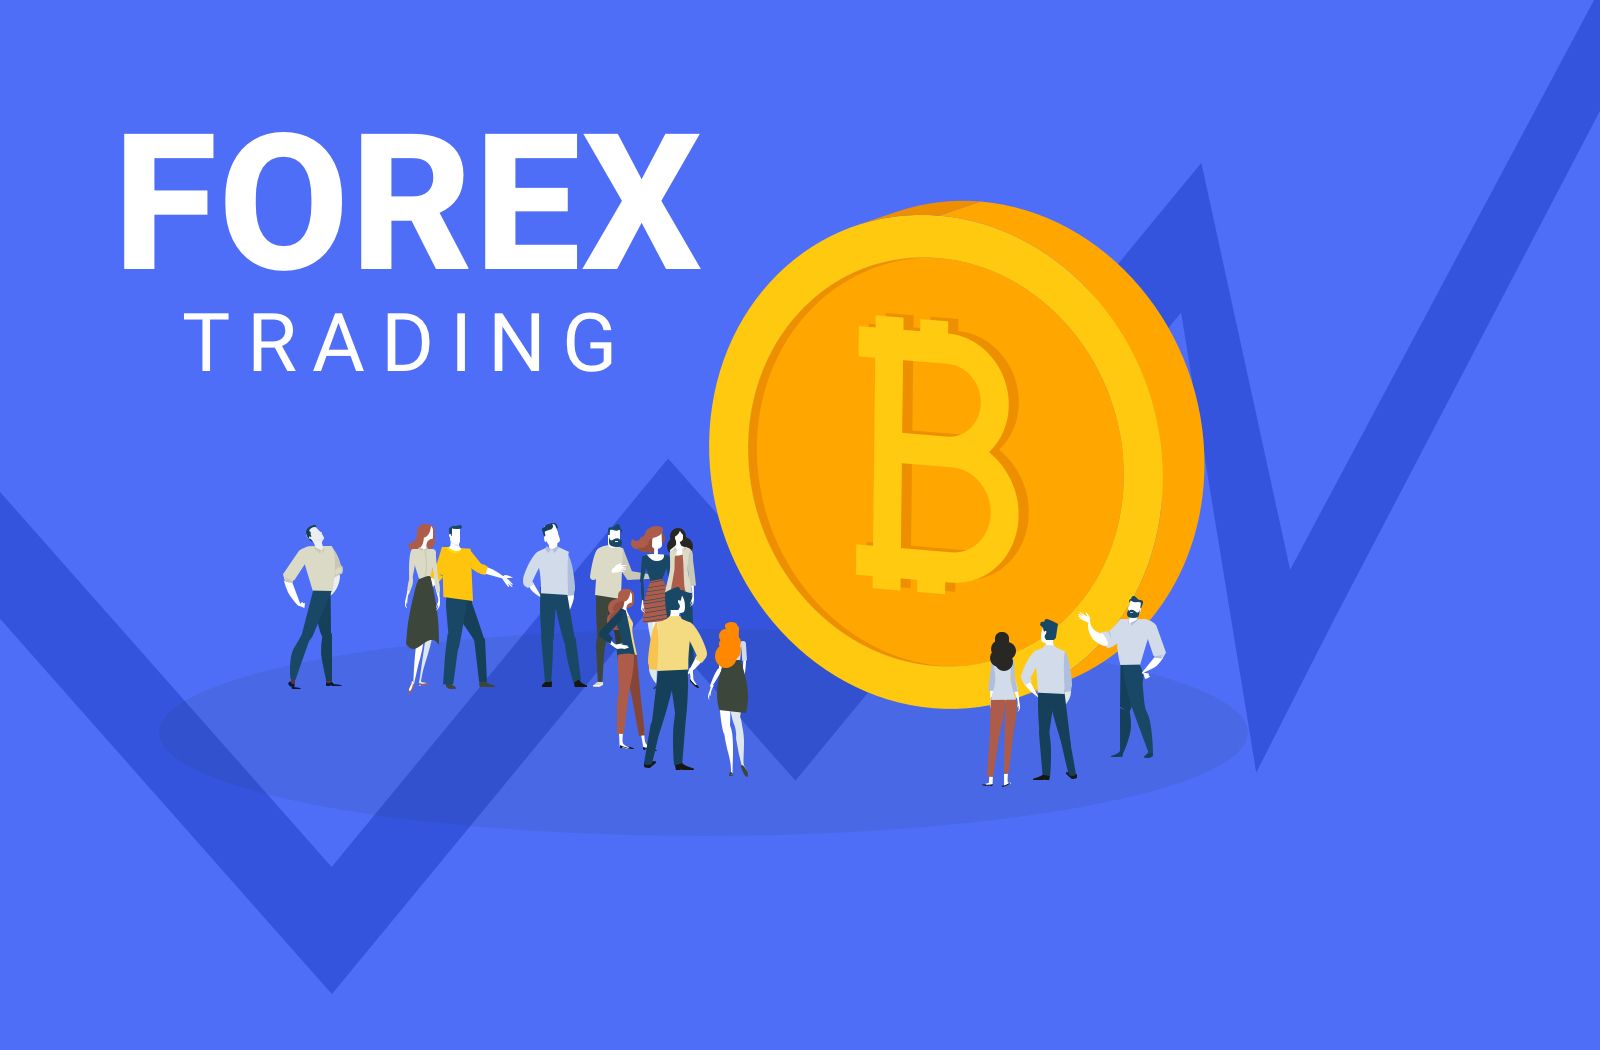 brokerii forex trading cryptocurrency